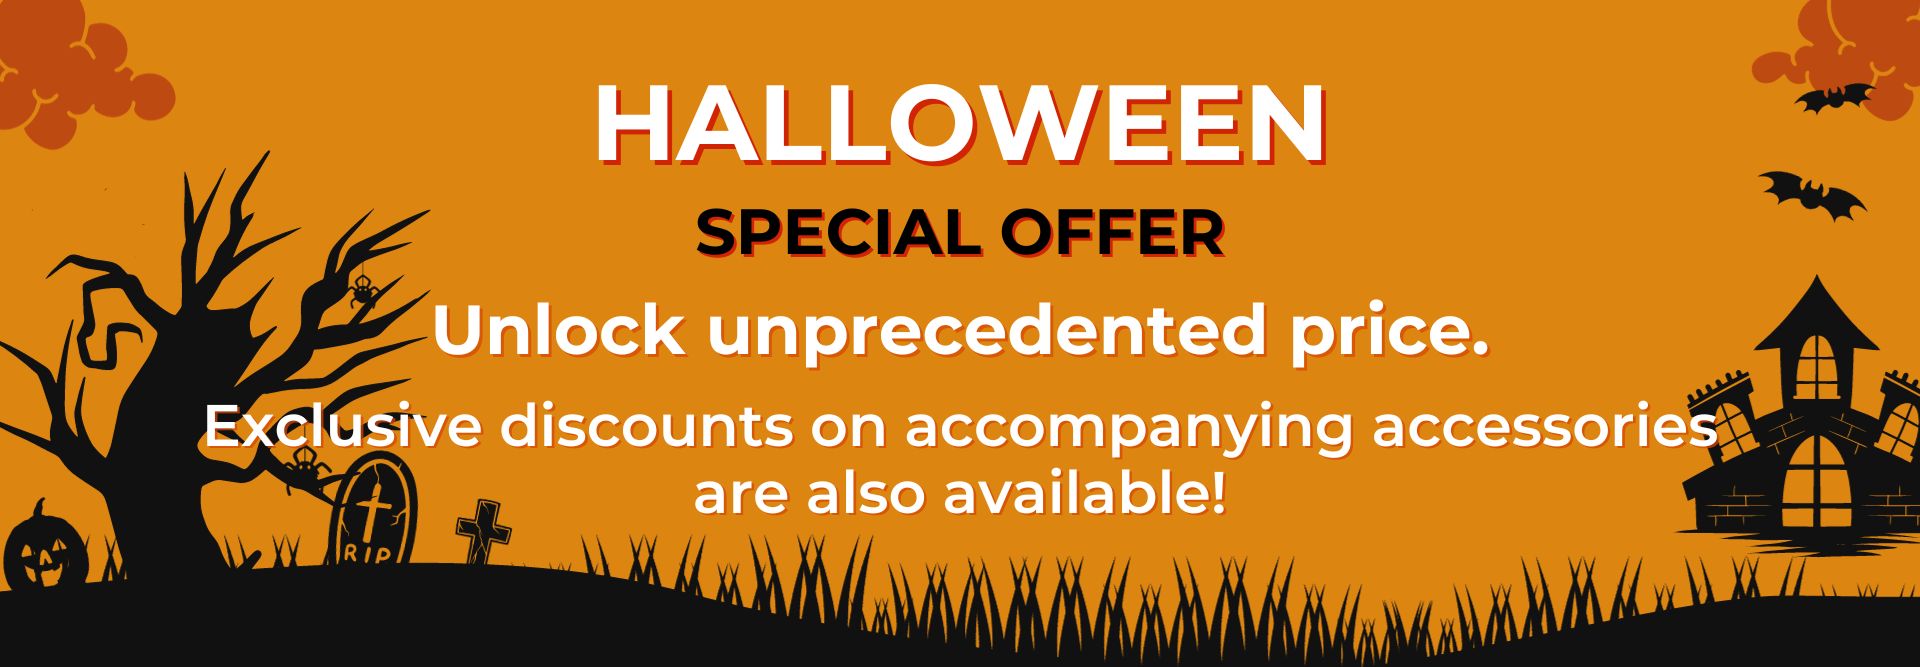 Halloween Special Offer. US Local in-stock clearance. Ships in 1 day, deliver in 2 to 5 days